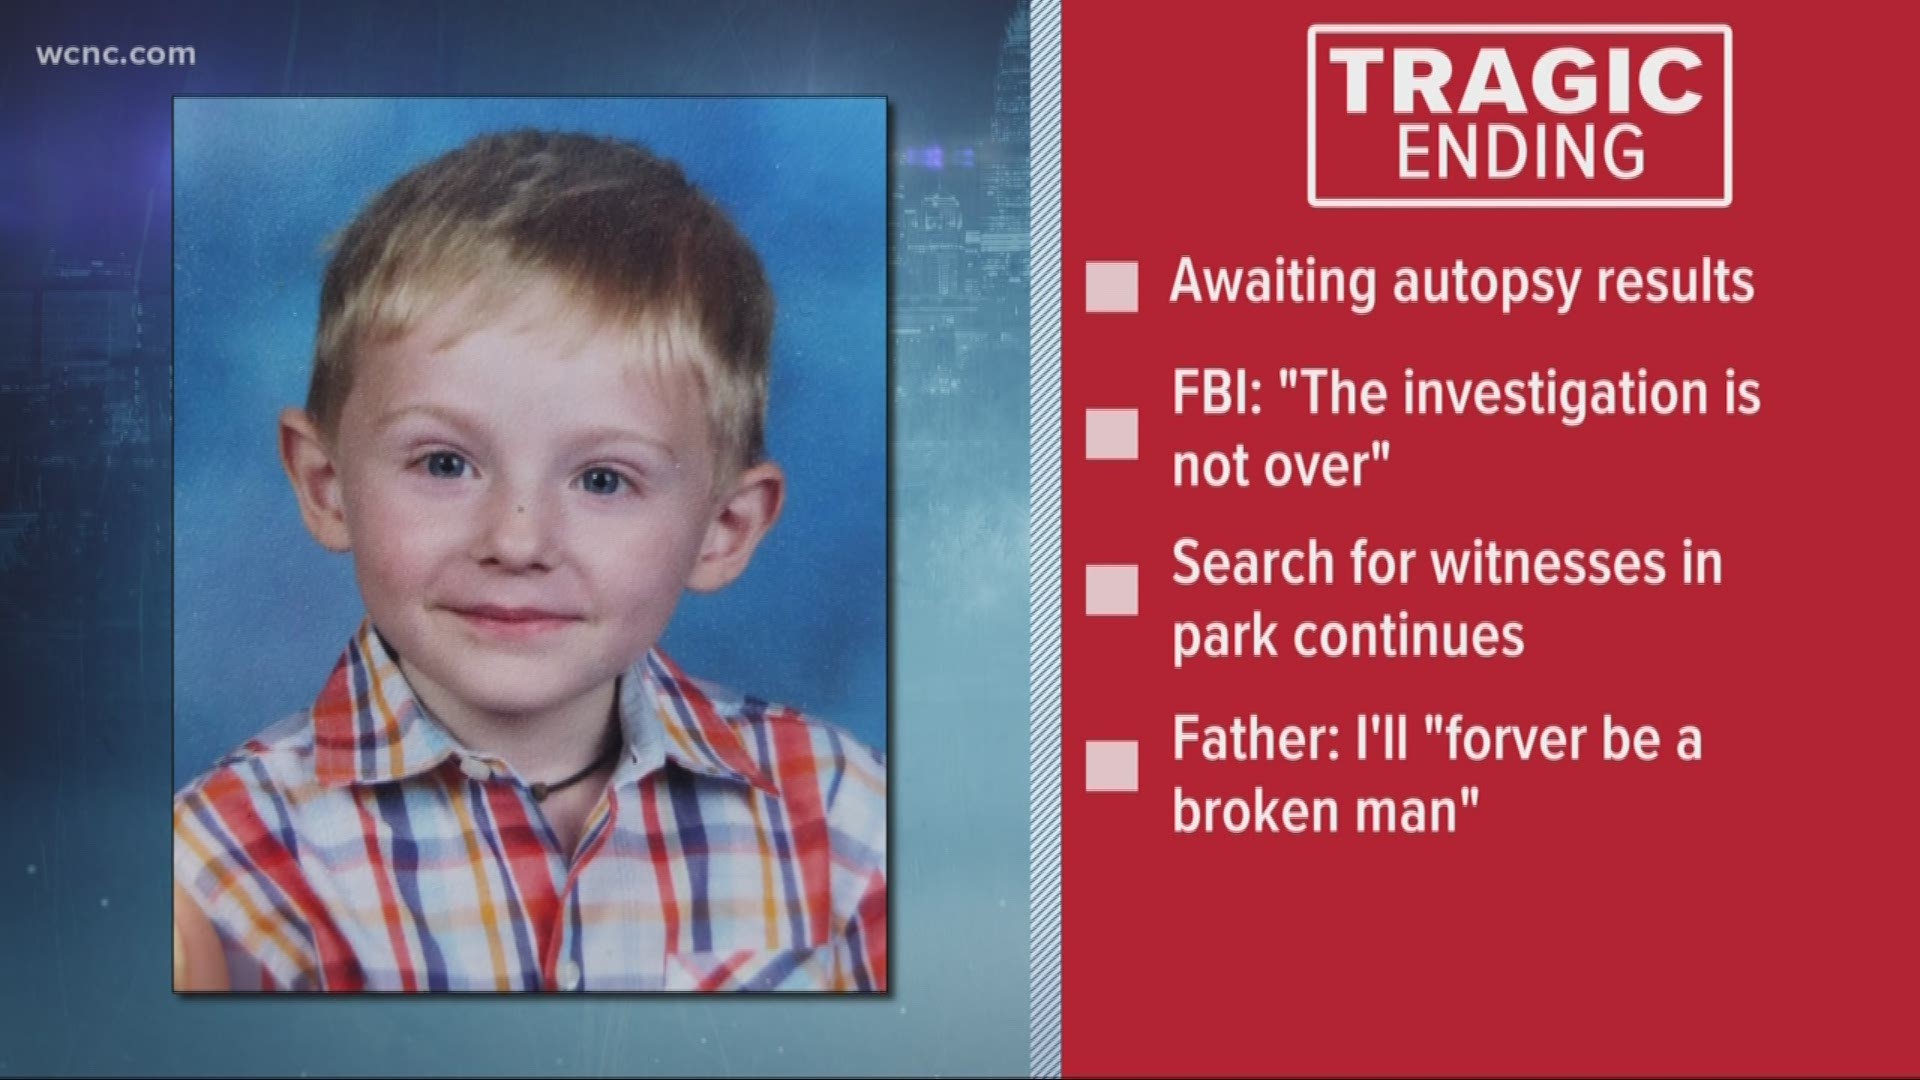 Authorities are seeking answers after finding a body believed to be the missing 6-year-old boy.